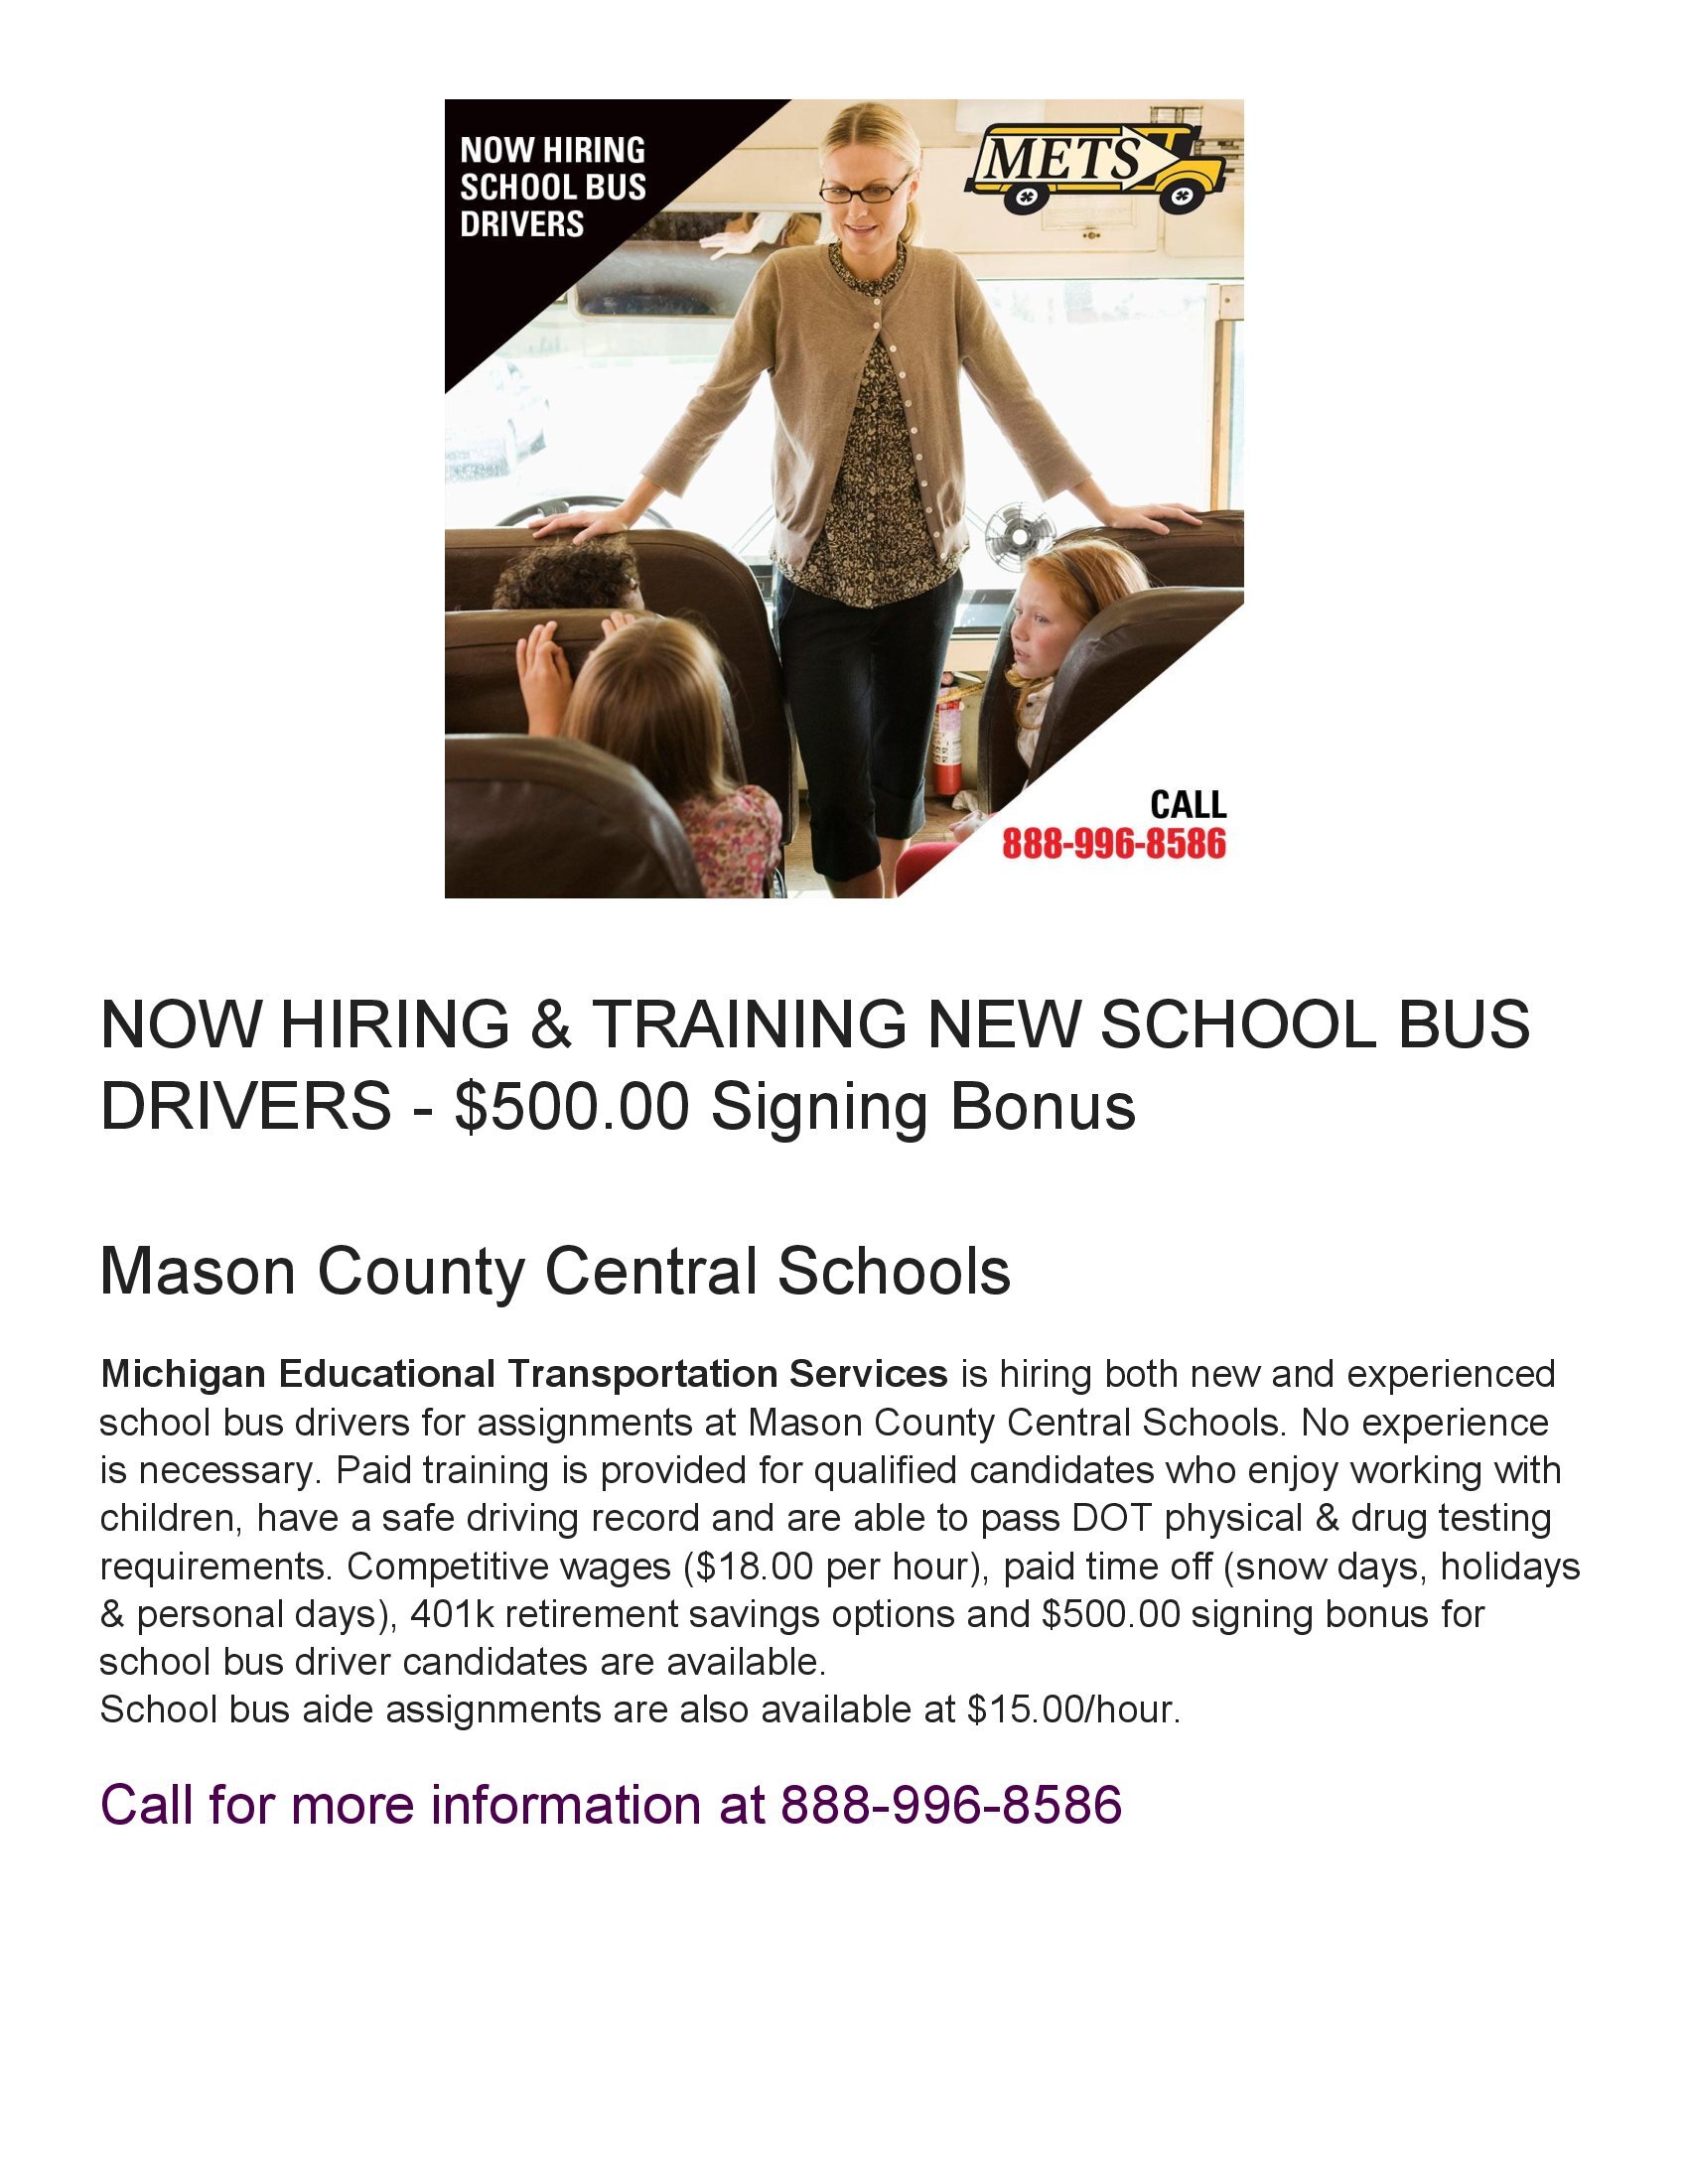 Mason County Central Schools Bus Drivers wanted